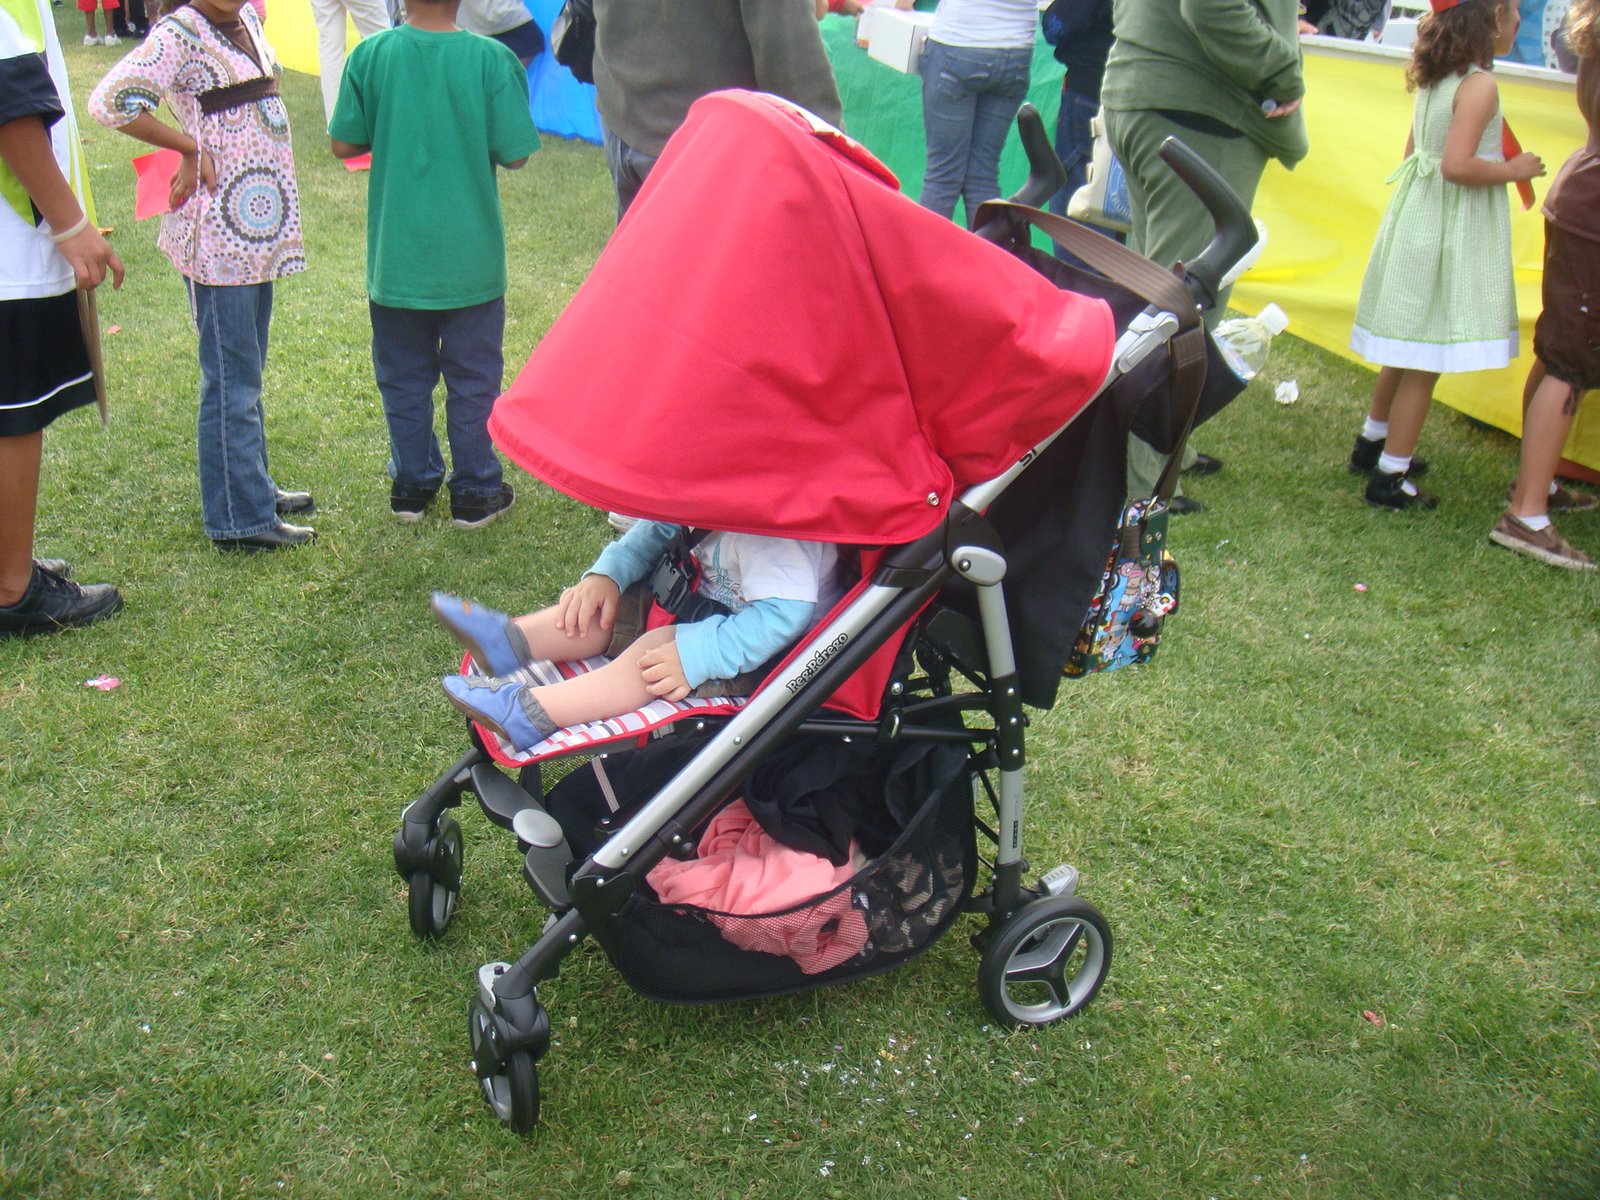 stroller with large canopy